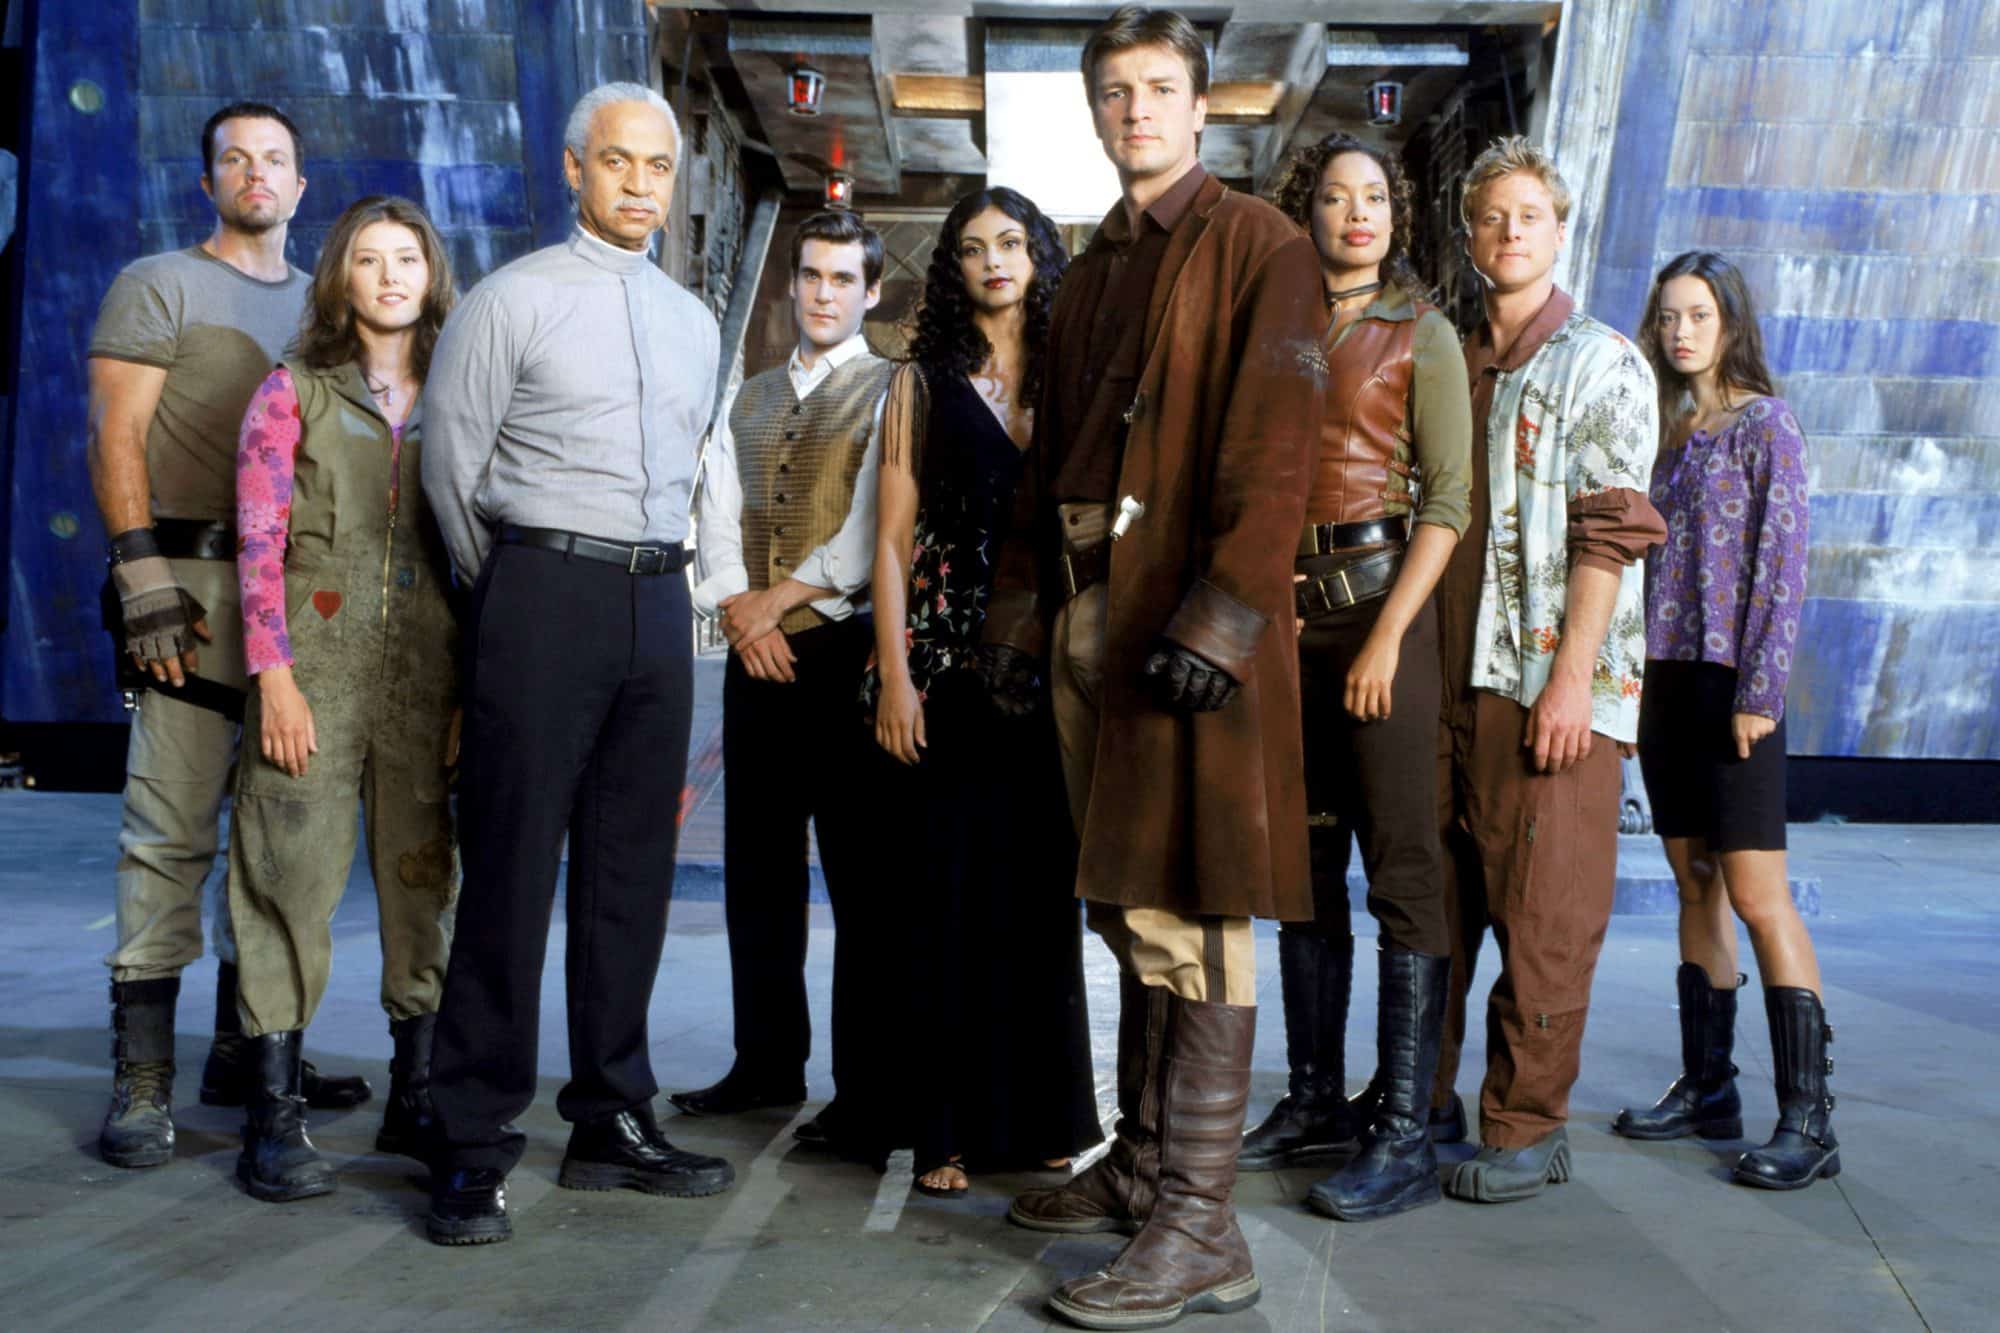 Cast of the show, Firefly